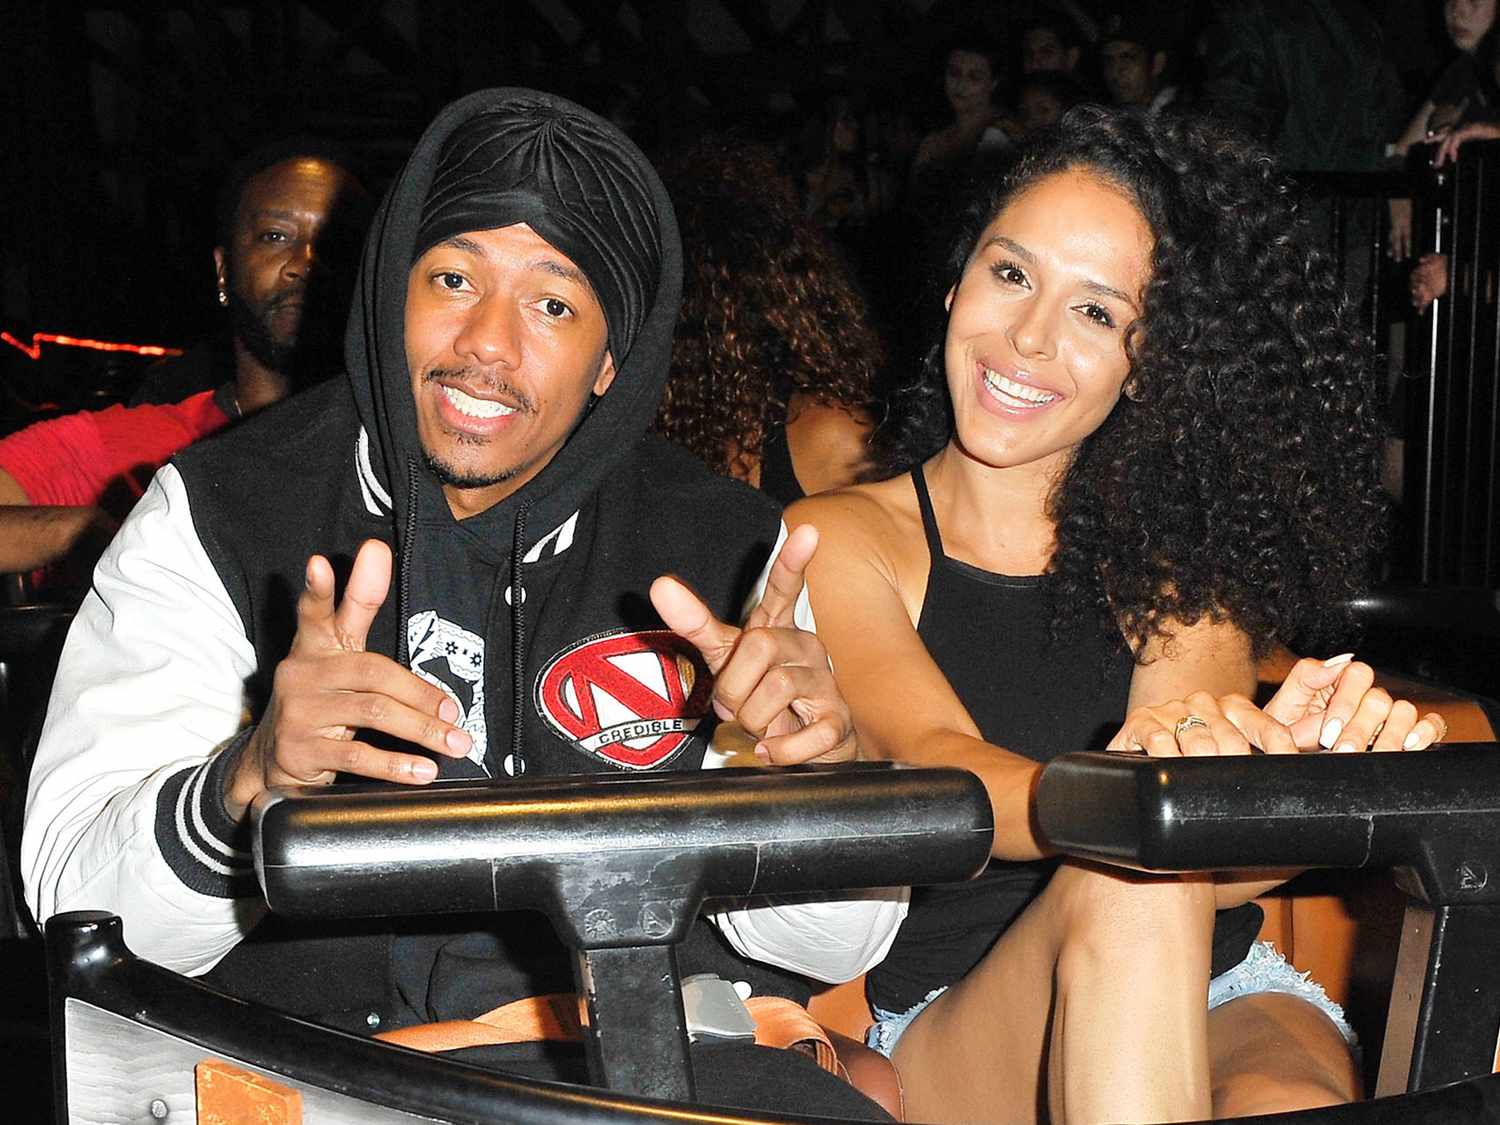 worst celeb baby names - nick cannon brittany bell - Credible